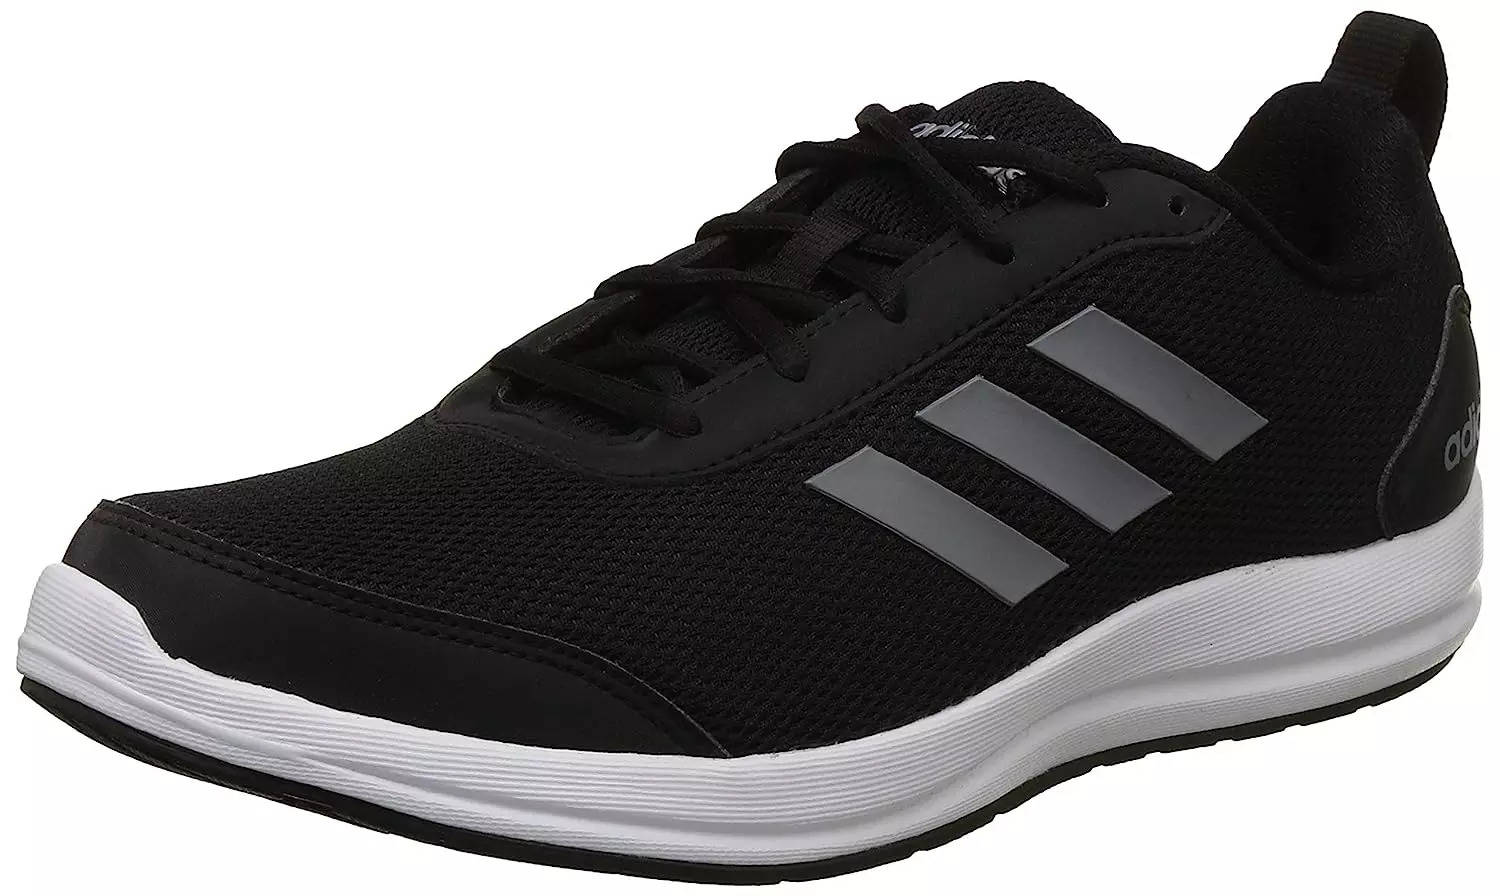 Branded Sports Shoes for Men: Branded Sports Shoes for Men in